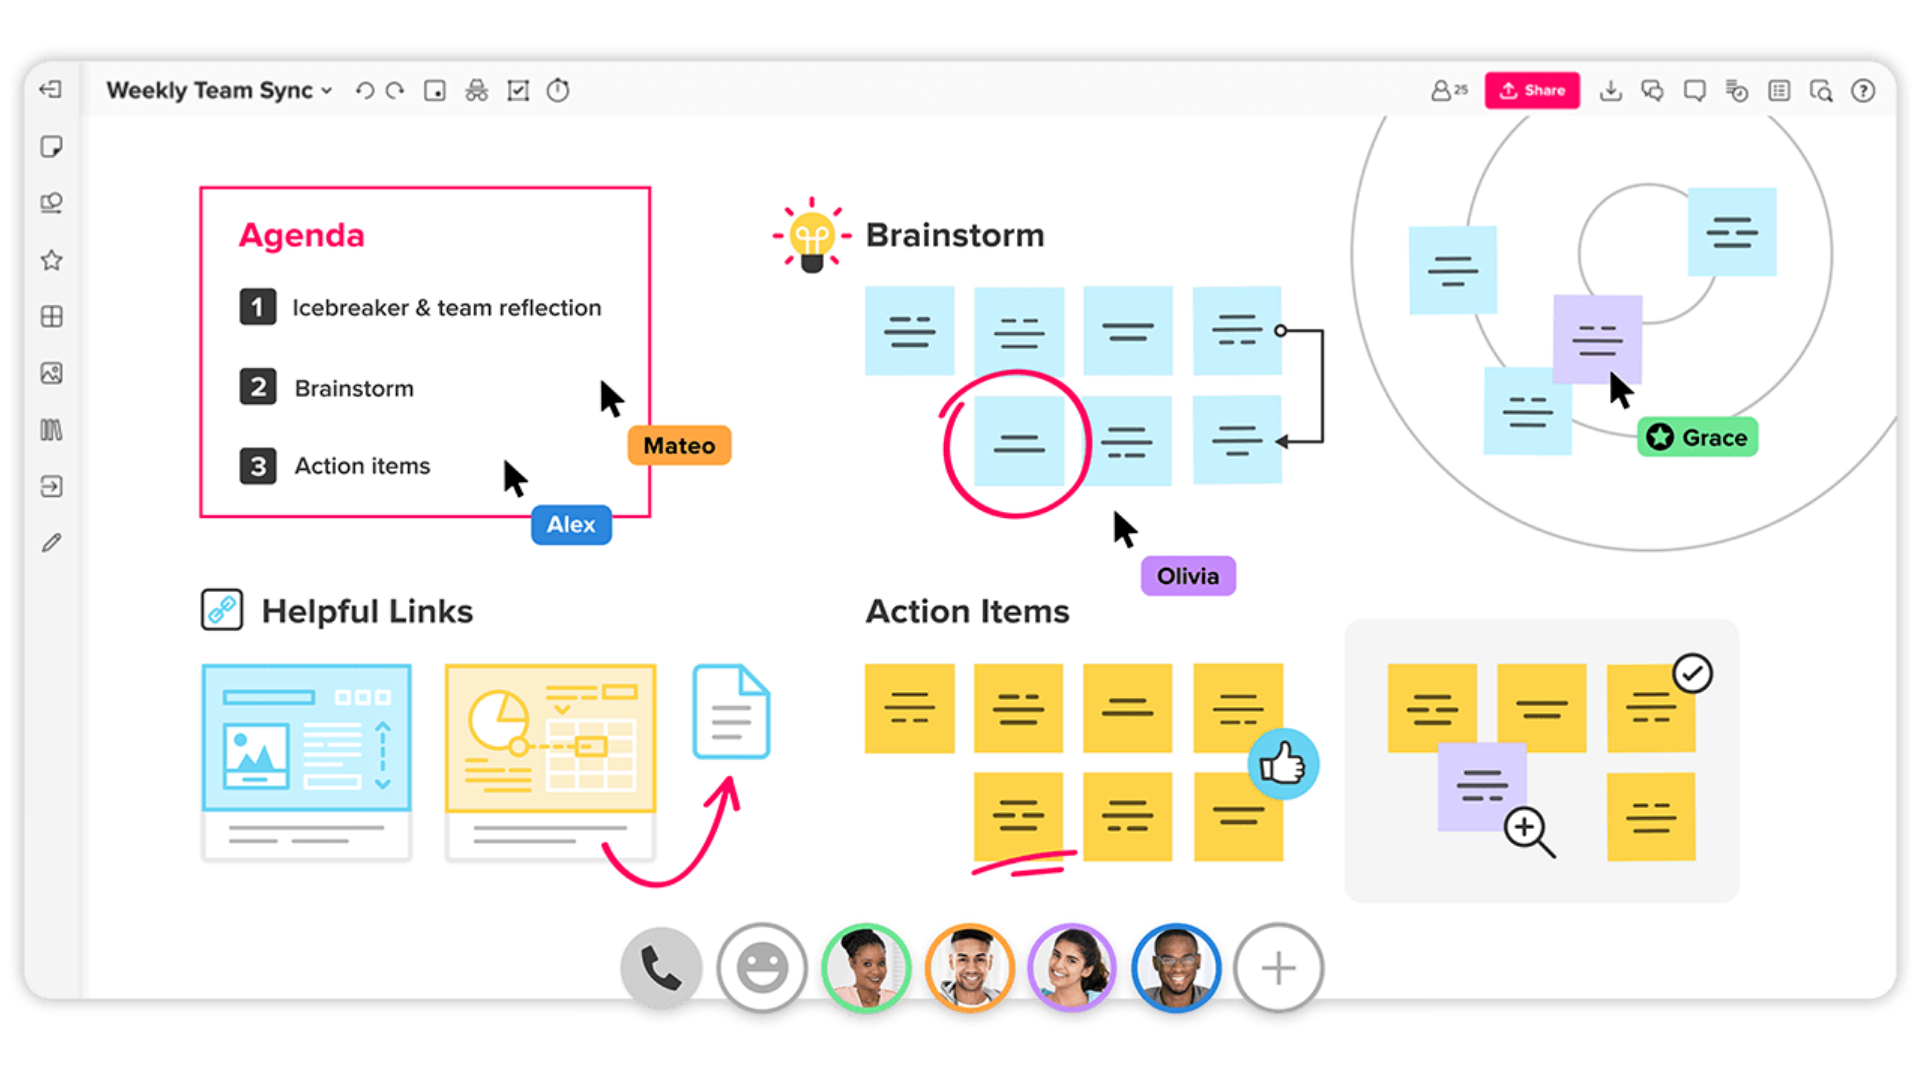 This MURAL screenshot shows some of the different ways you can use the platform for. Users can transform its whiteboard into meeting agendas, brainstorming notes, Agile development dashboards, Kanban boards, and more.